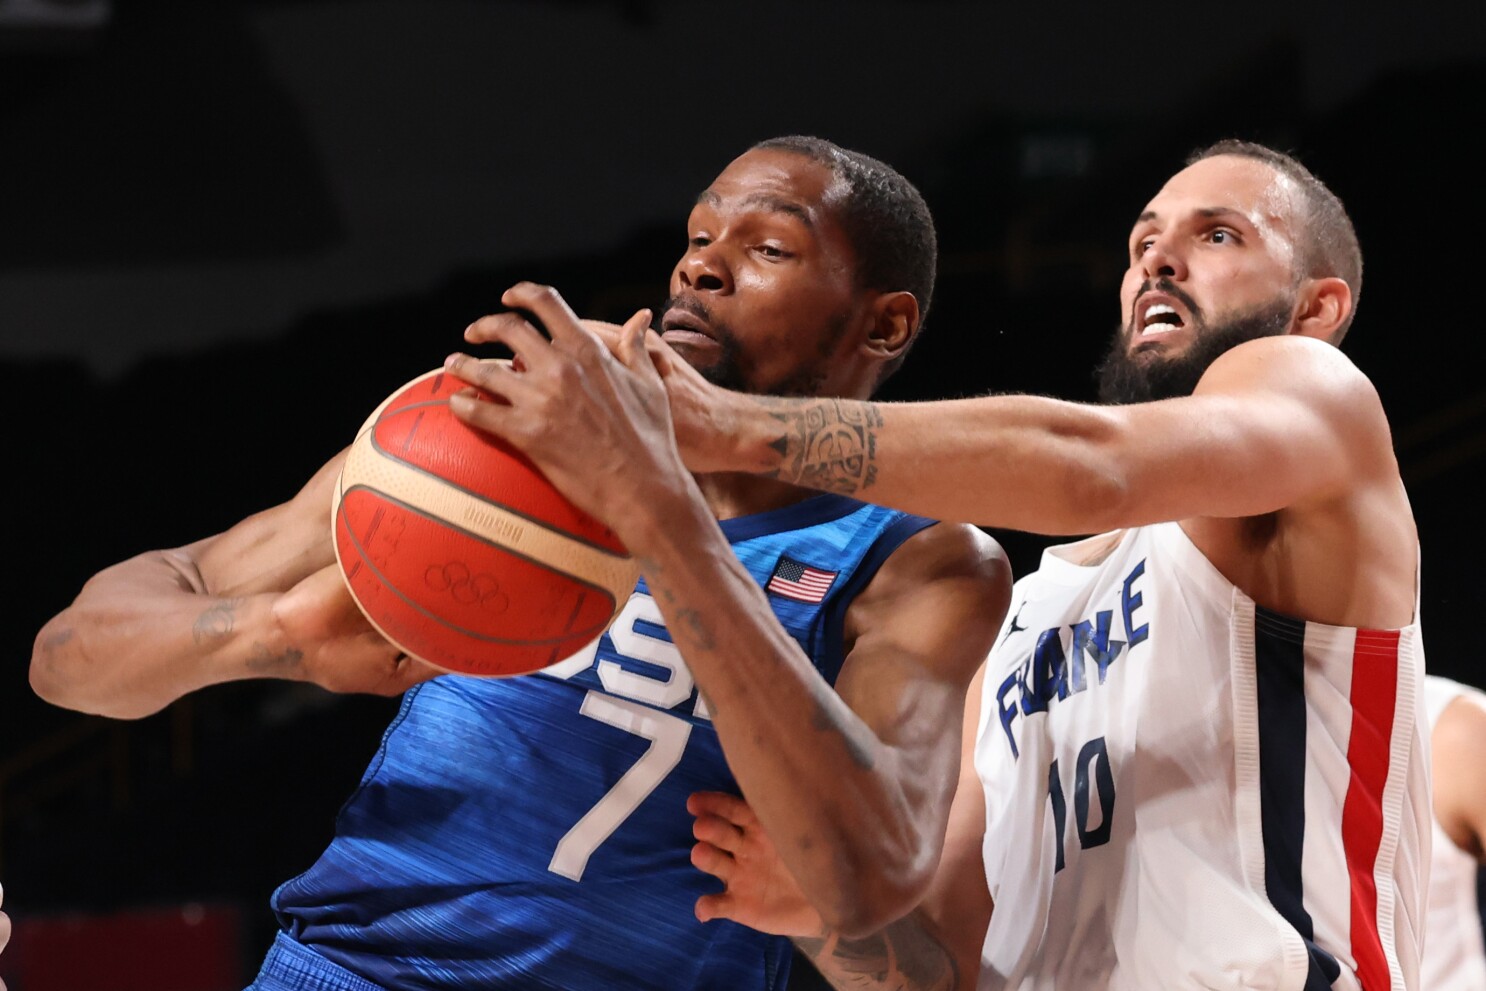 U S Men S Basketball Loses To France In Tokyo Olympics Opener Los Angeles Times